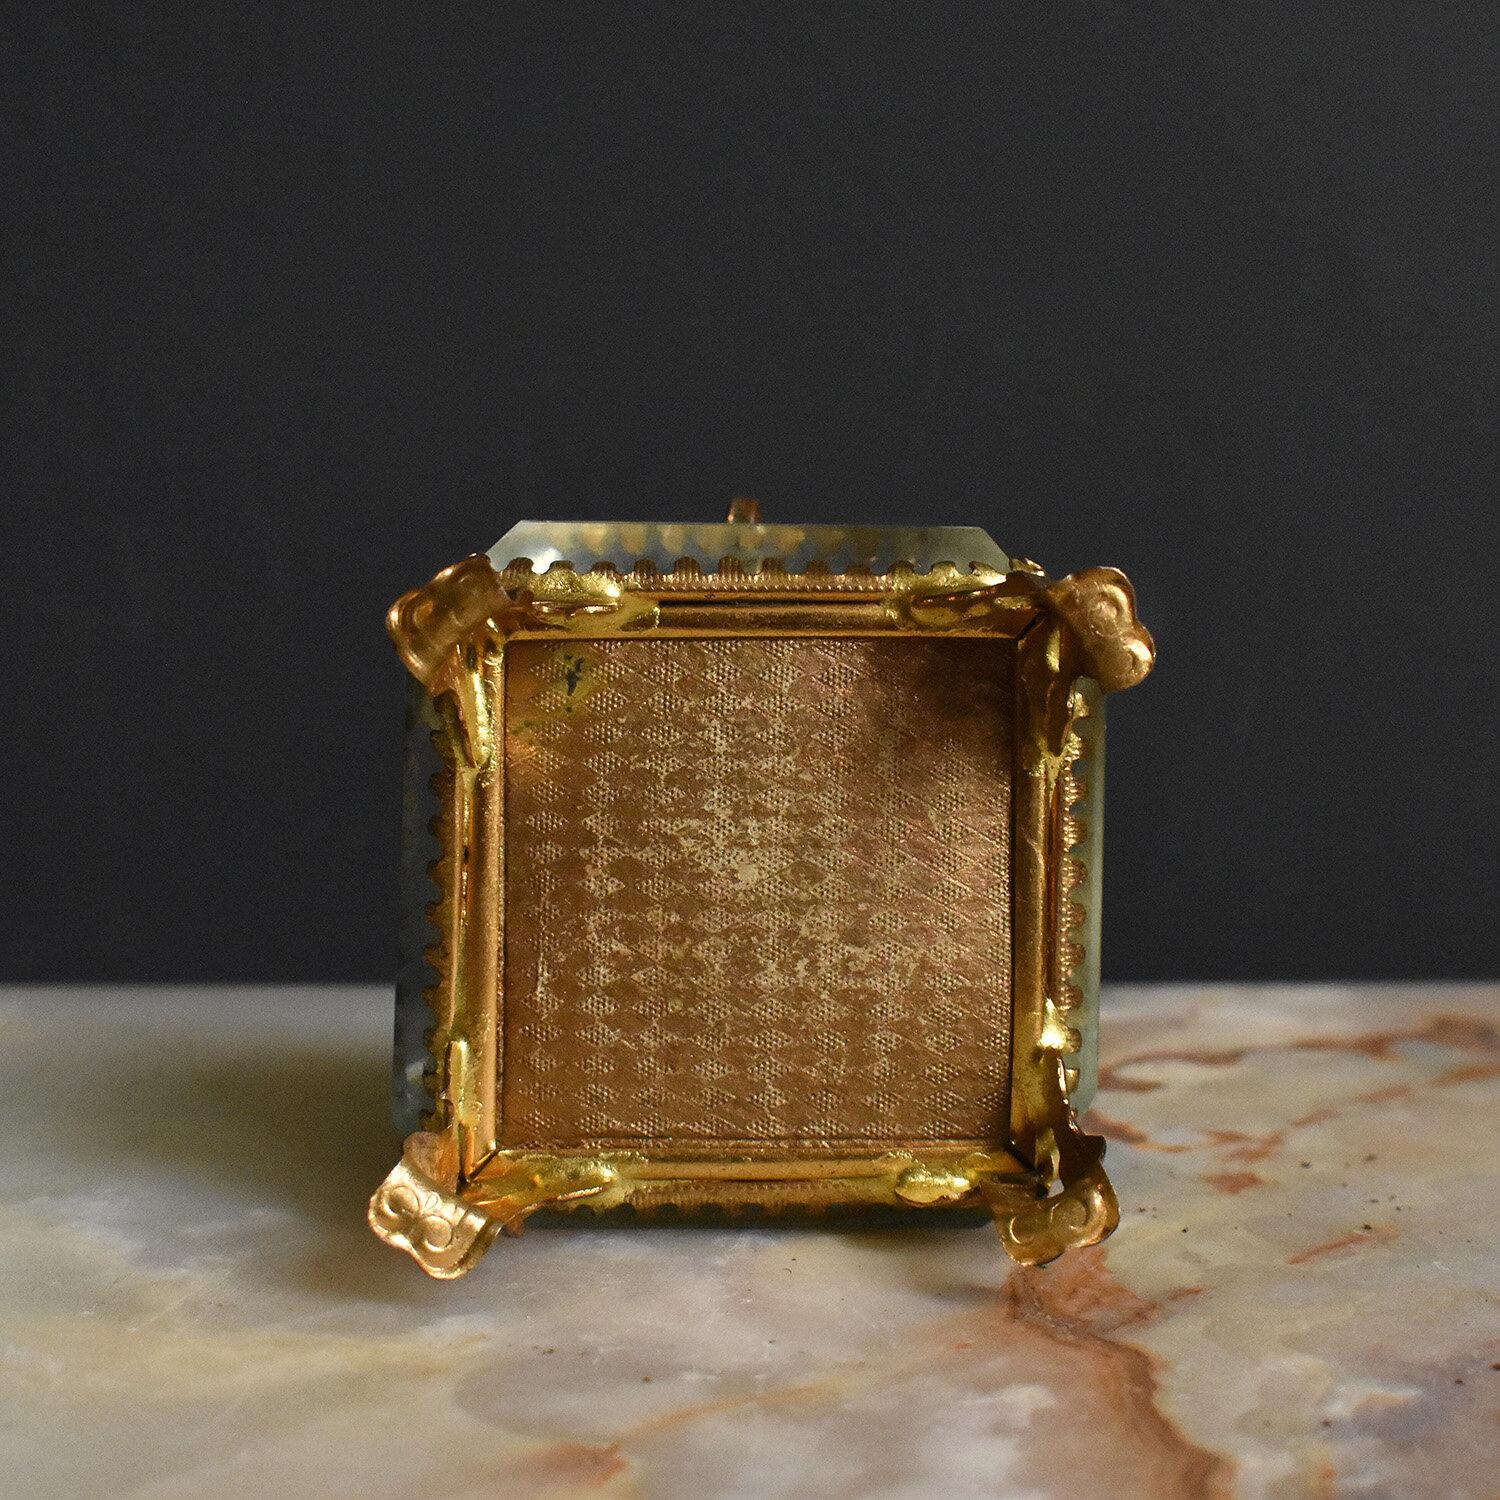 Antique French Gilt Brass and Cut Glass Souvenir Jewellery Casket, 19th Century For Sale 9